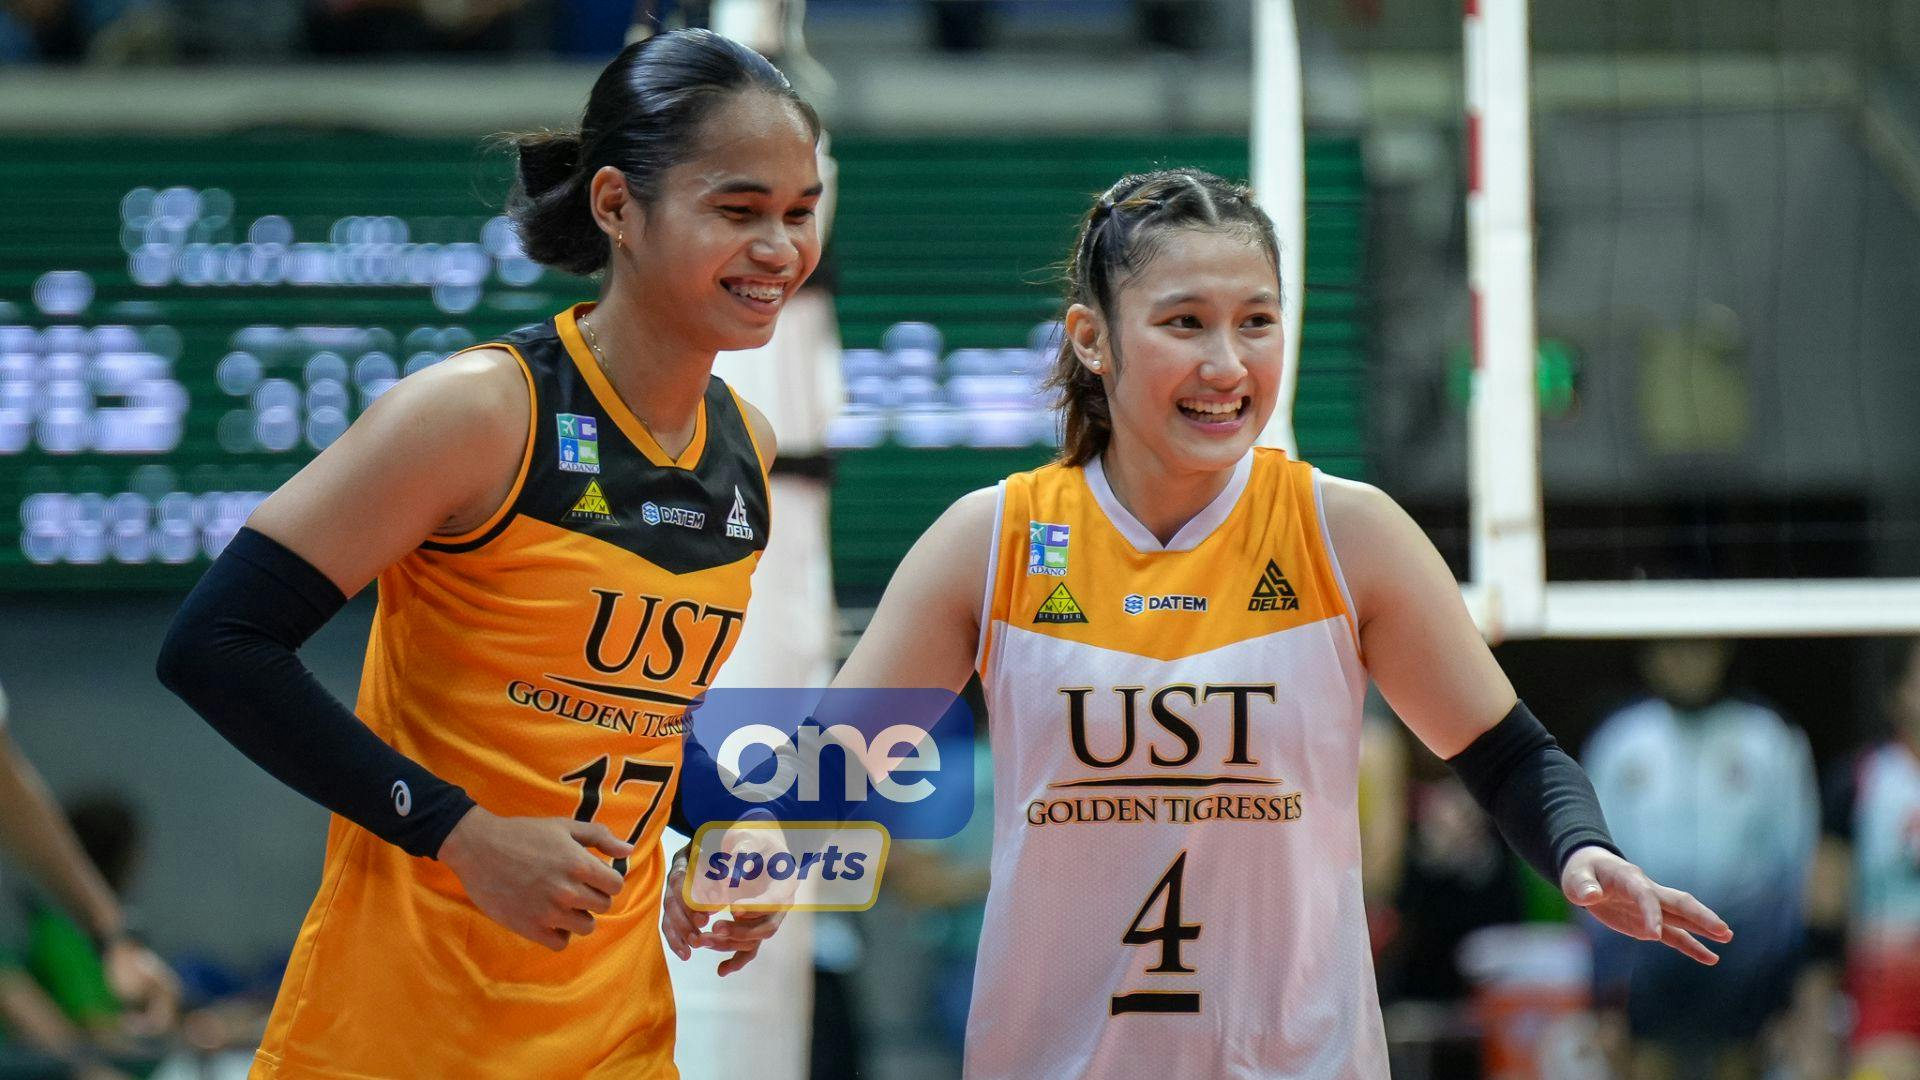 UAAP: Youthful UST Golden Tigresses embrace pressure ahead of big games heading into Final Four